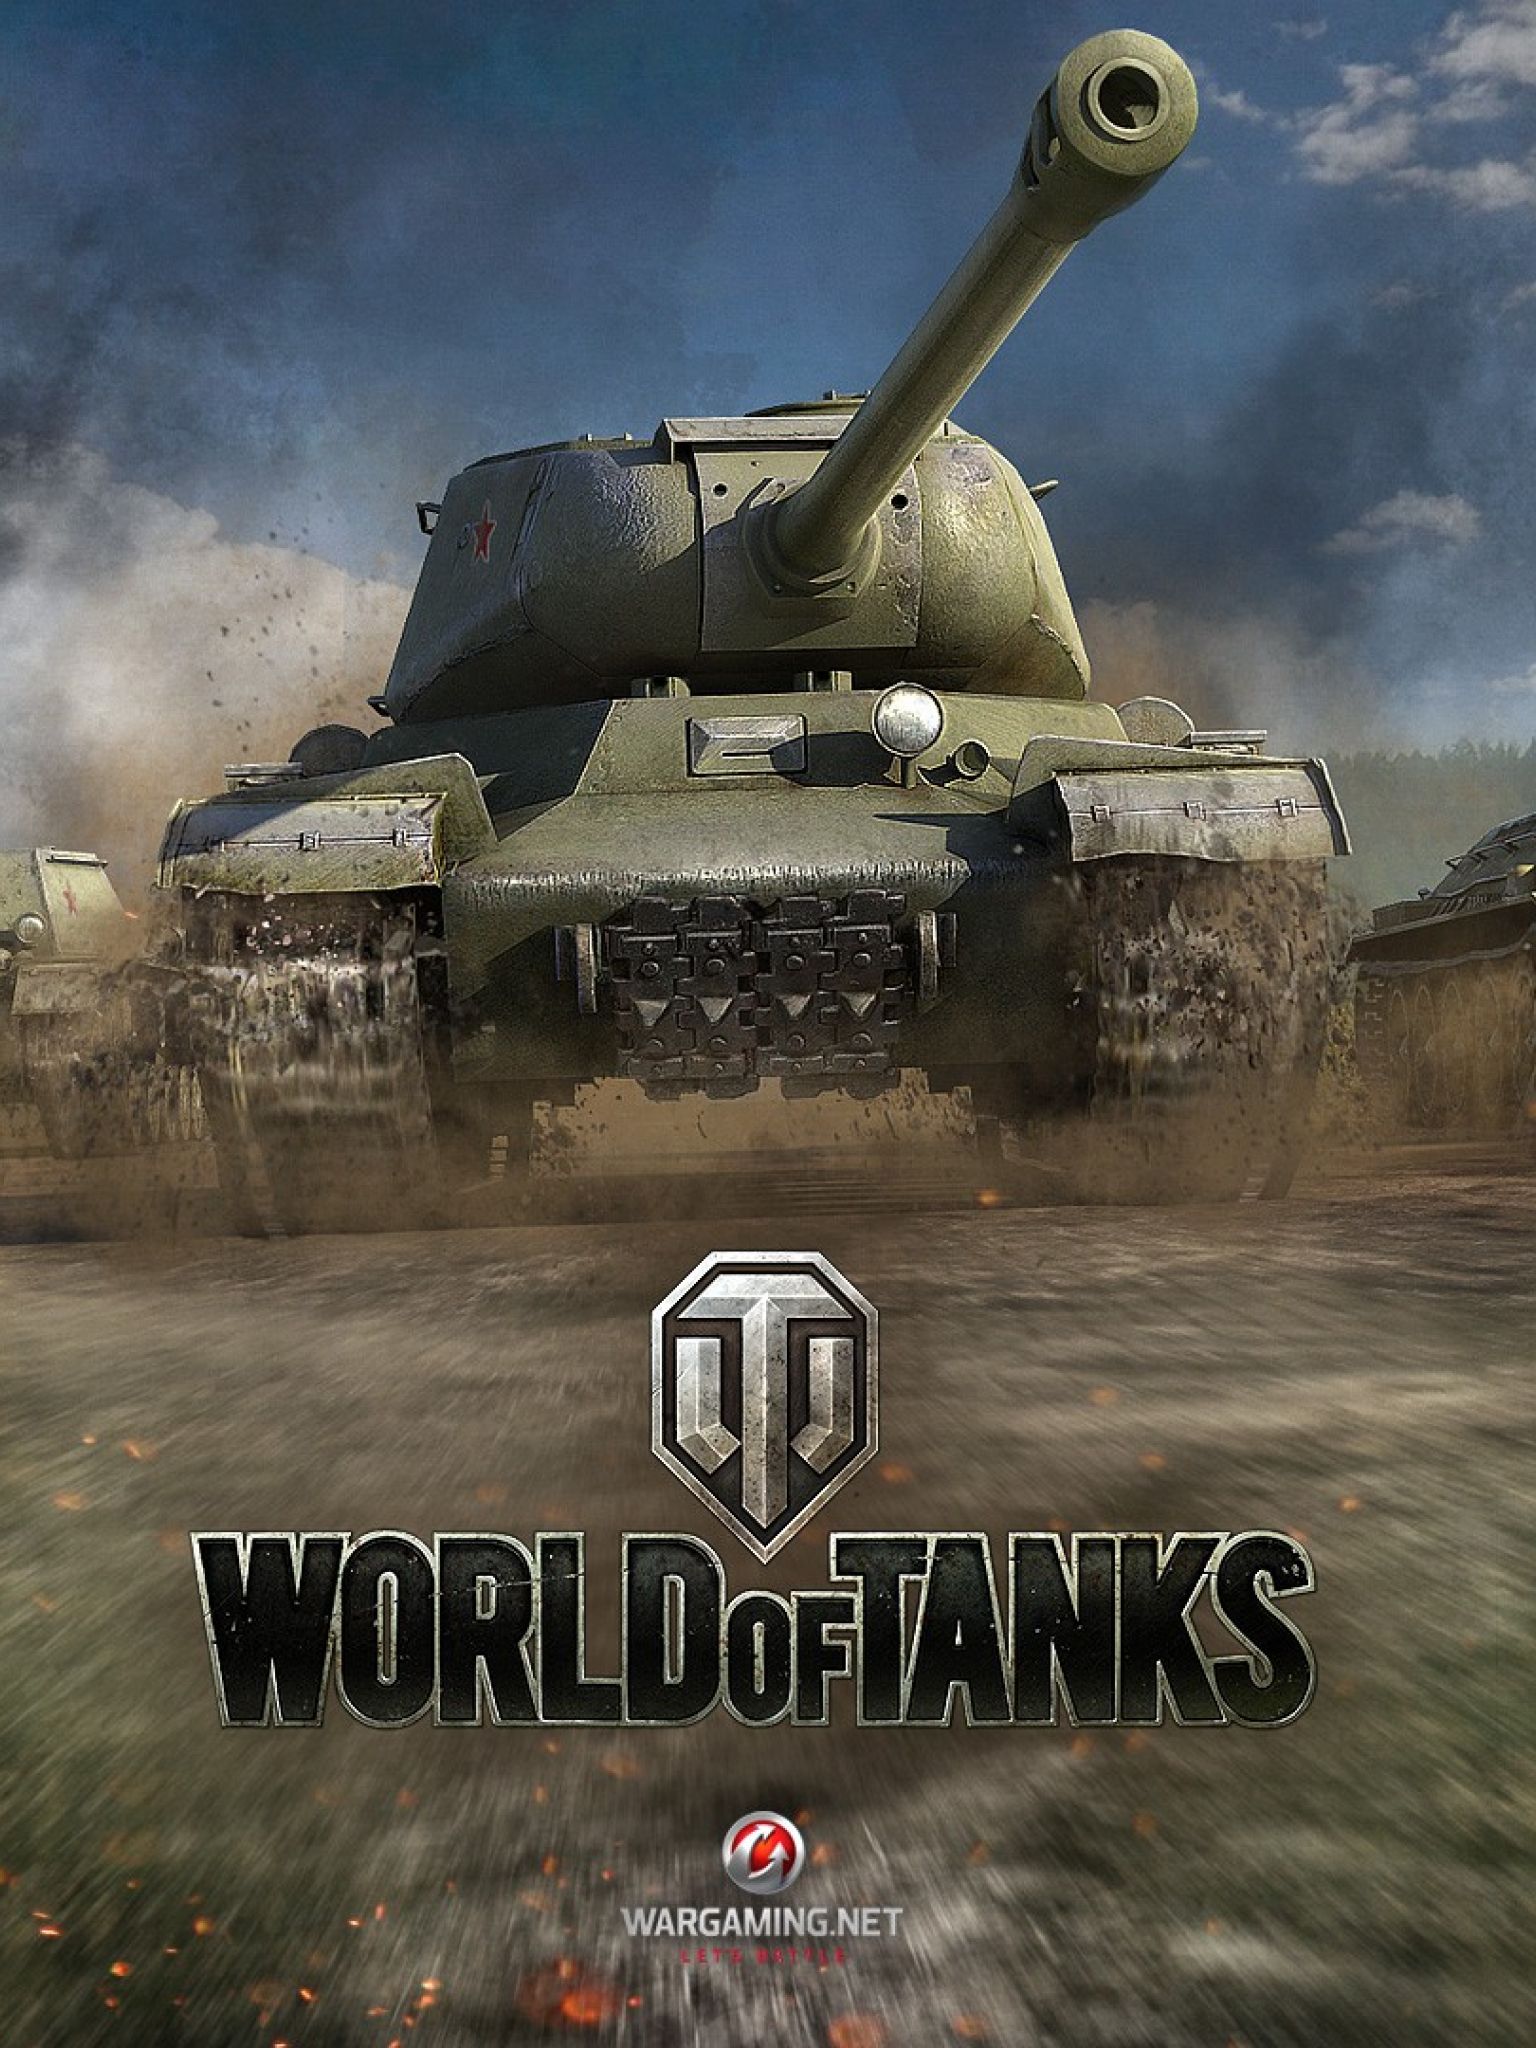 Wot android. World of Tanks. Танк World of Tanks. Картинки танков. Картинки World of Tanks.